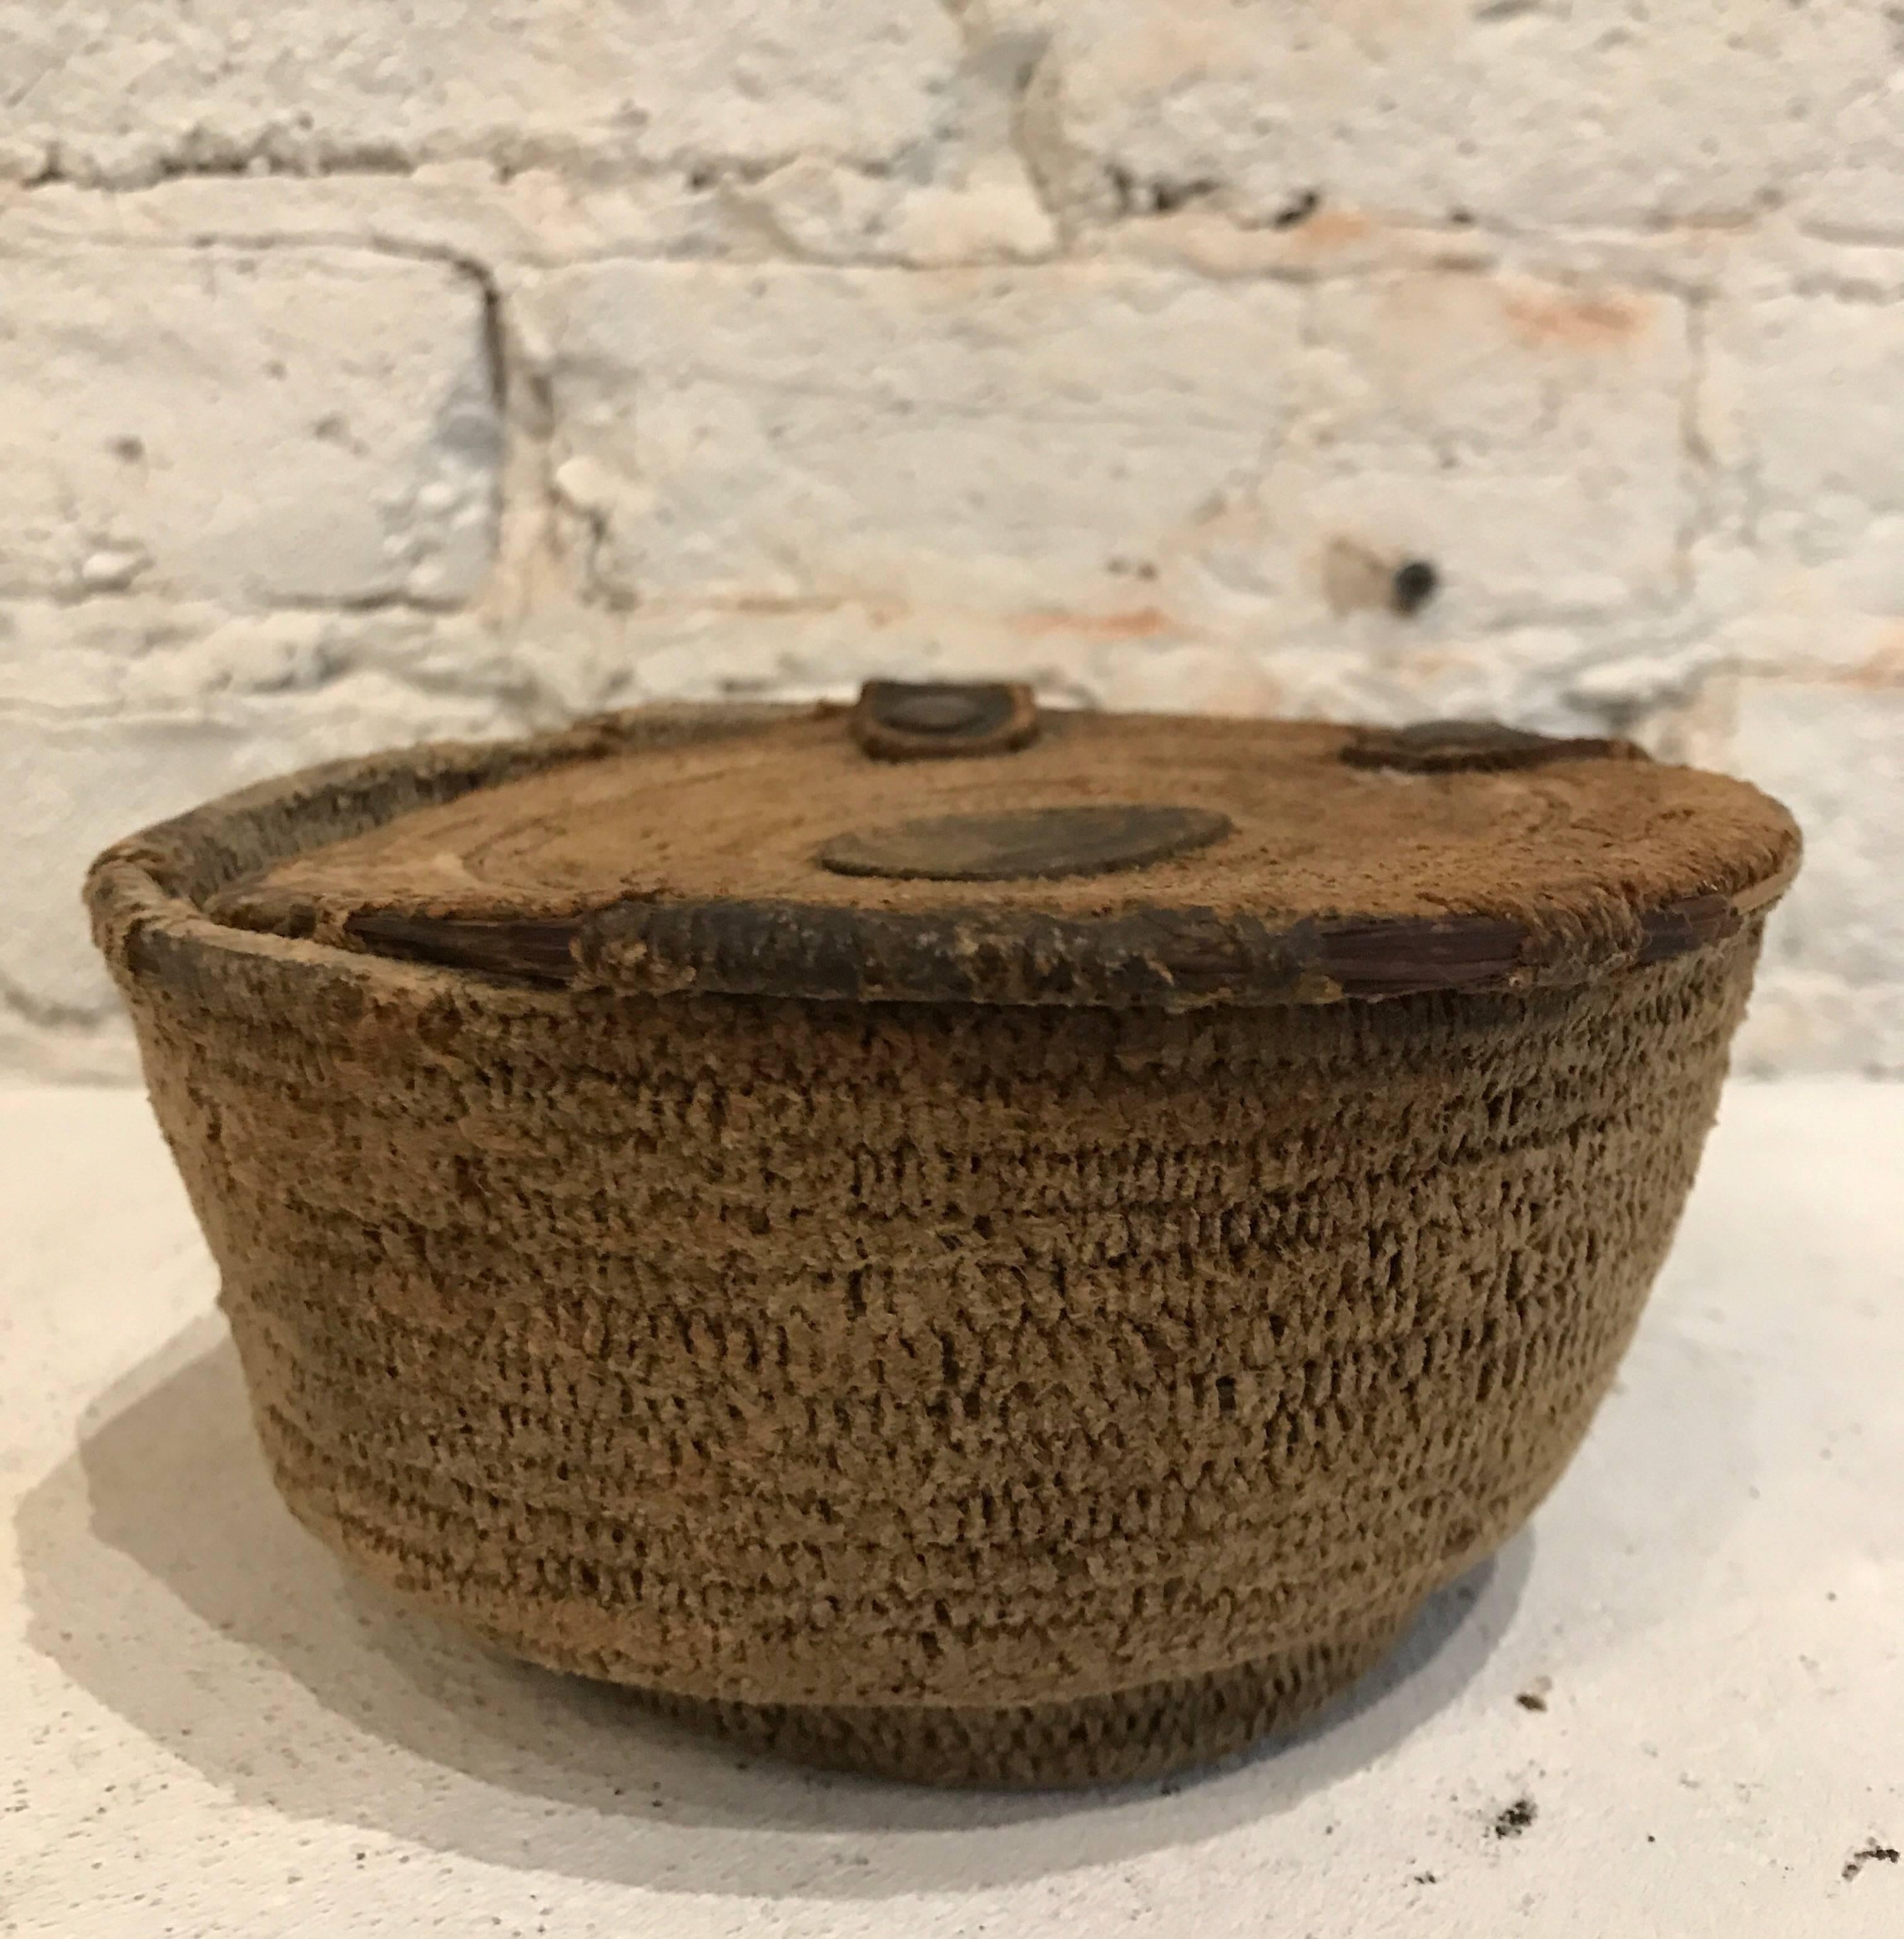 19th century African woven basket food storage container with leather details
Beautiful blonde patina





Measures: Basket: 5.25 inch D x 3 inch H
Base of basket: 3.5 inch D.